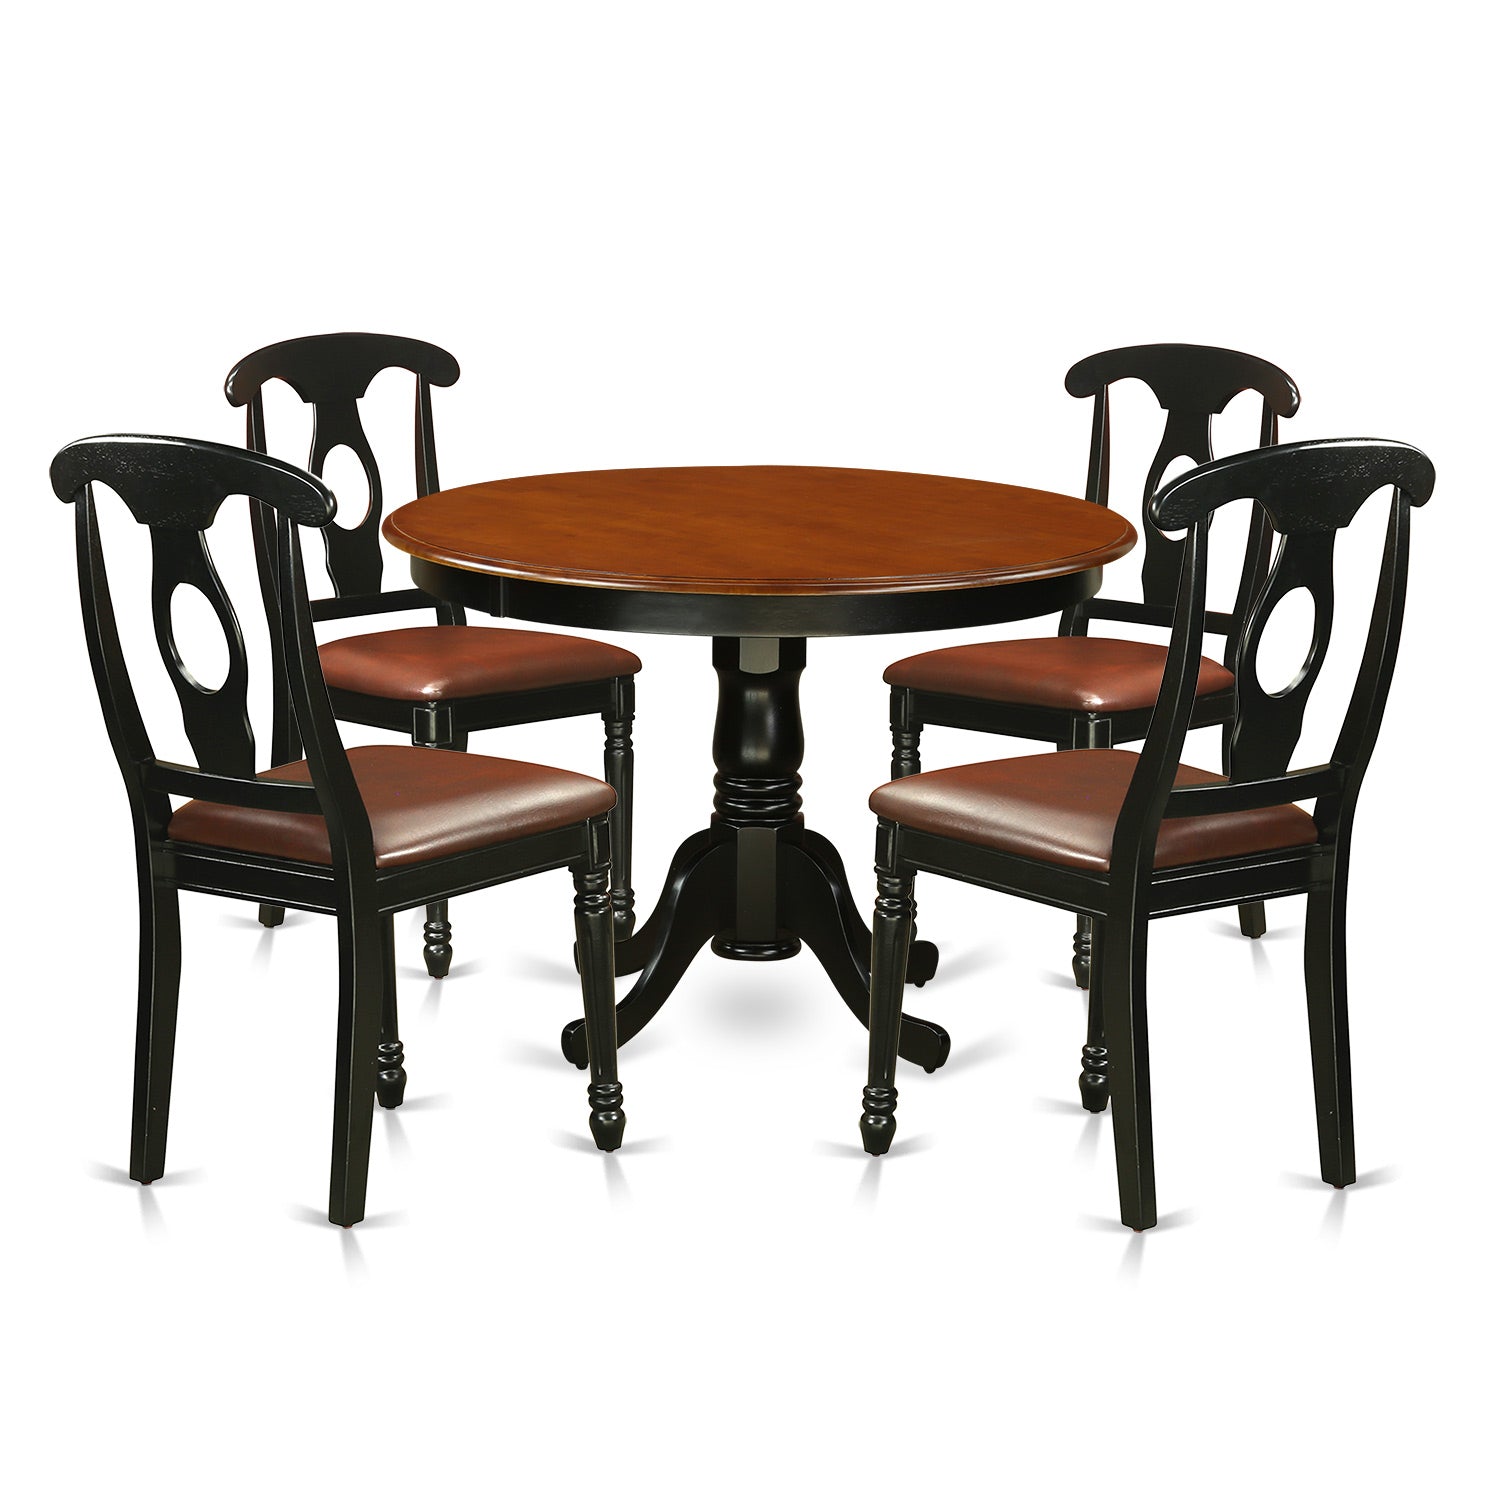 5 Pc Set With Black Cherry Round Dining Room Table and Leatherette Chairs